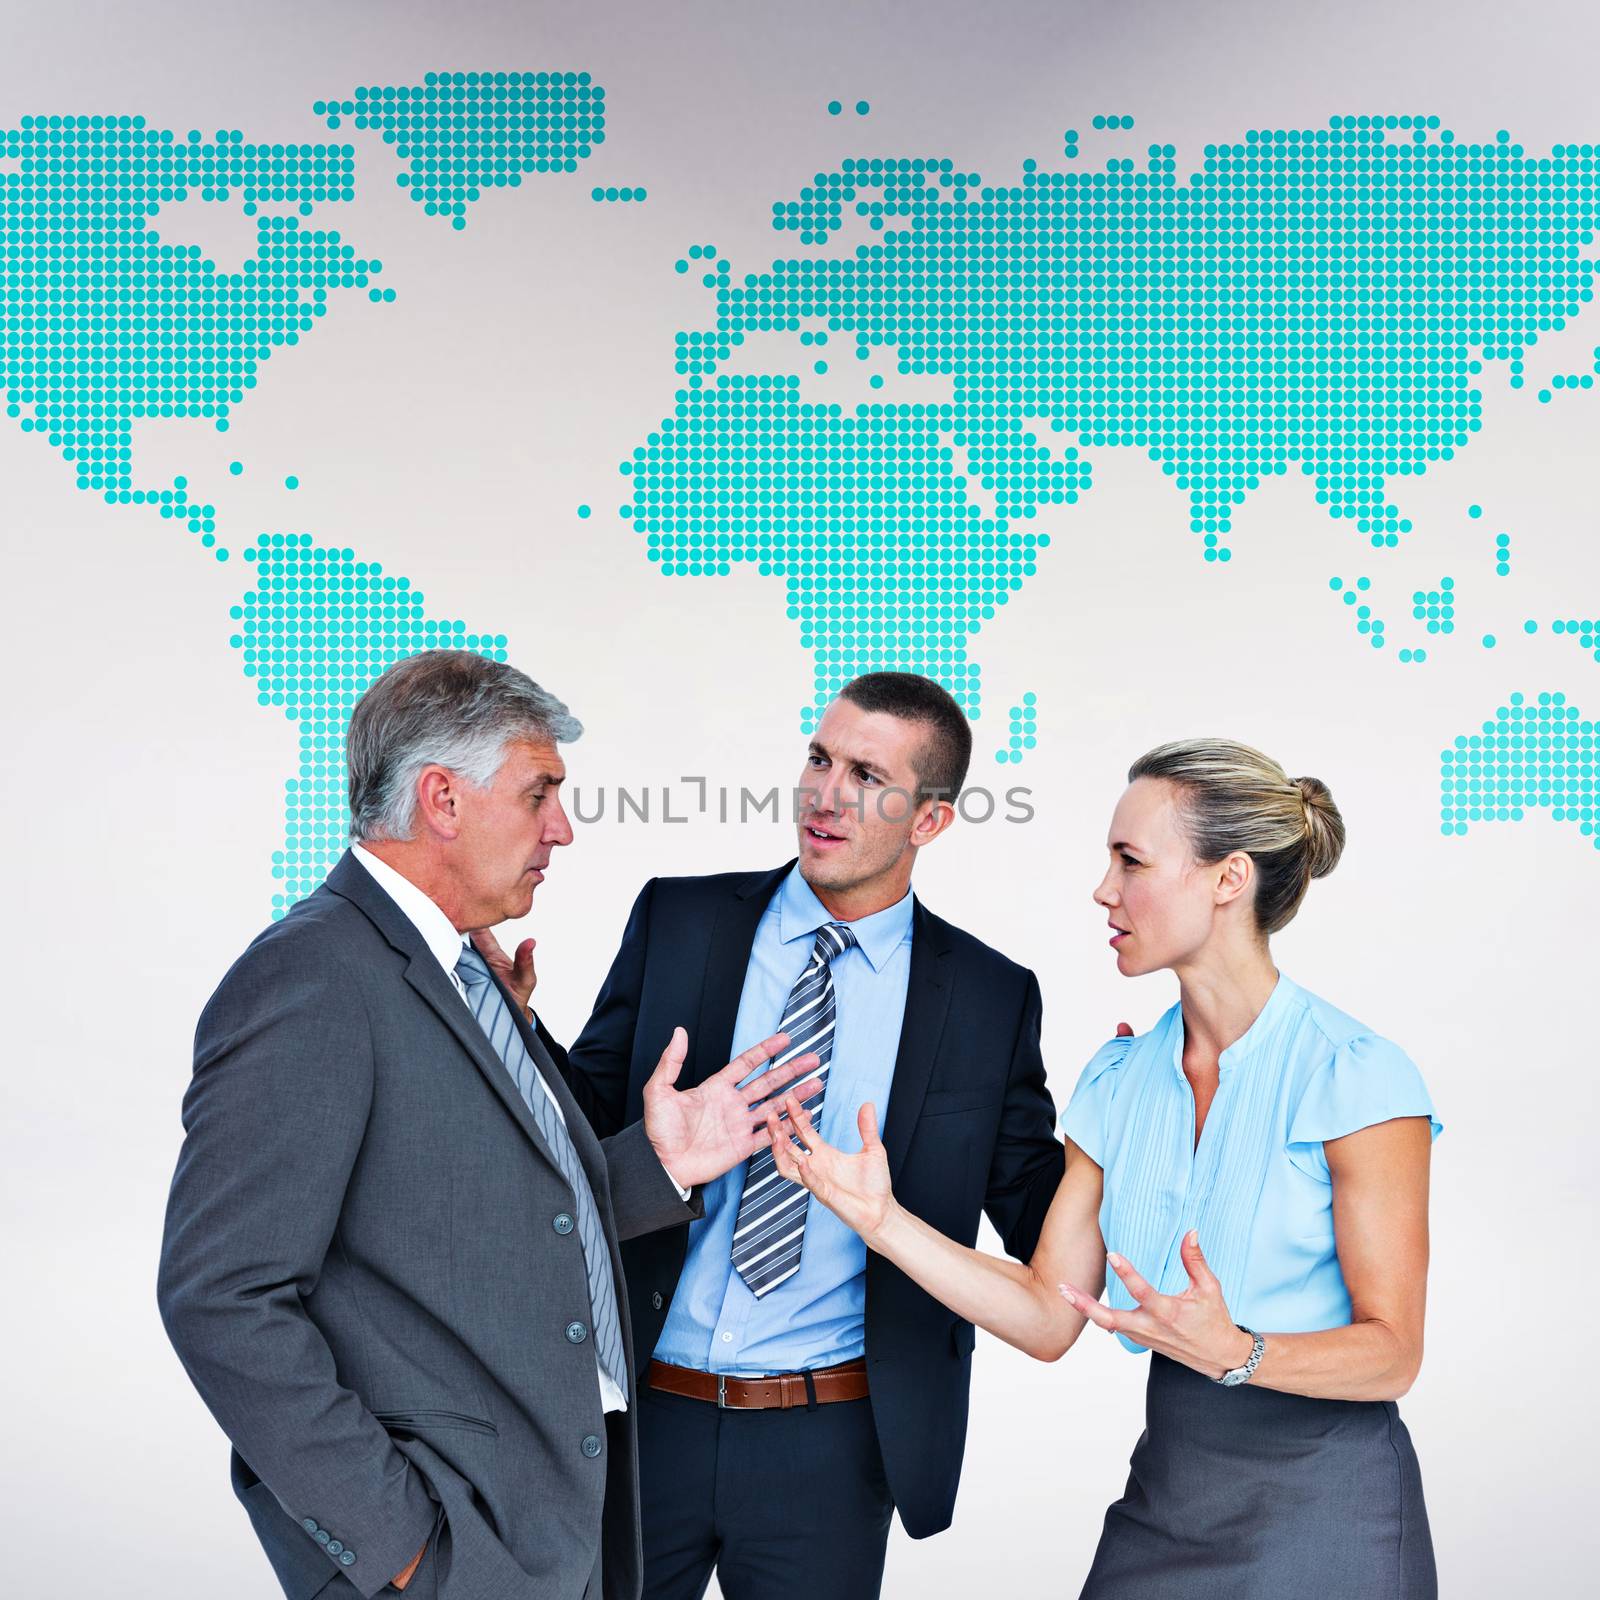 Business people having a disagreement against green world map on white background